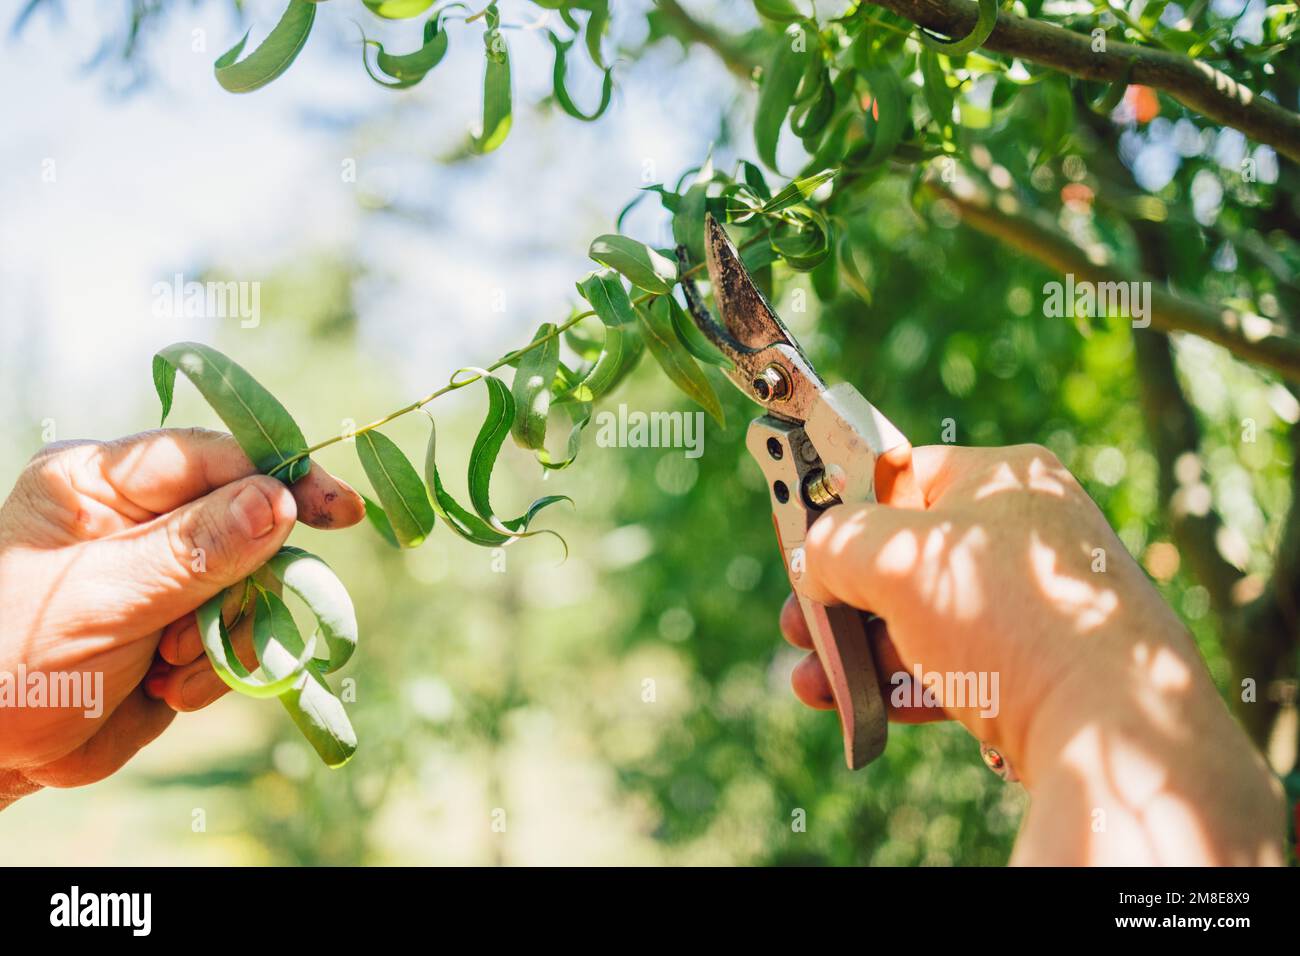 Unrecognizable man's hands pruning willow tree with pruning shears. Domestic occupation Stock Photo